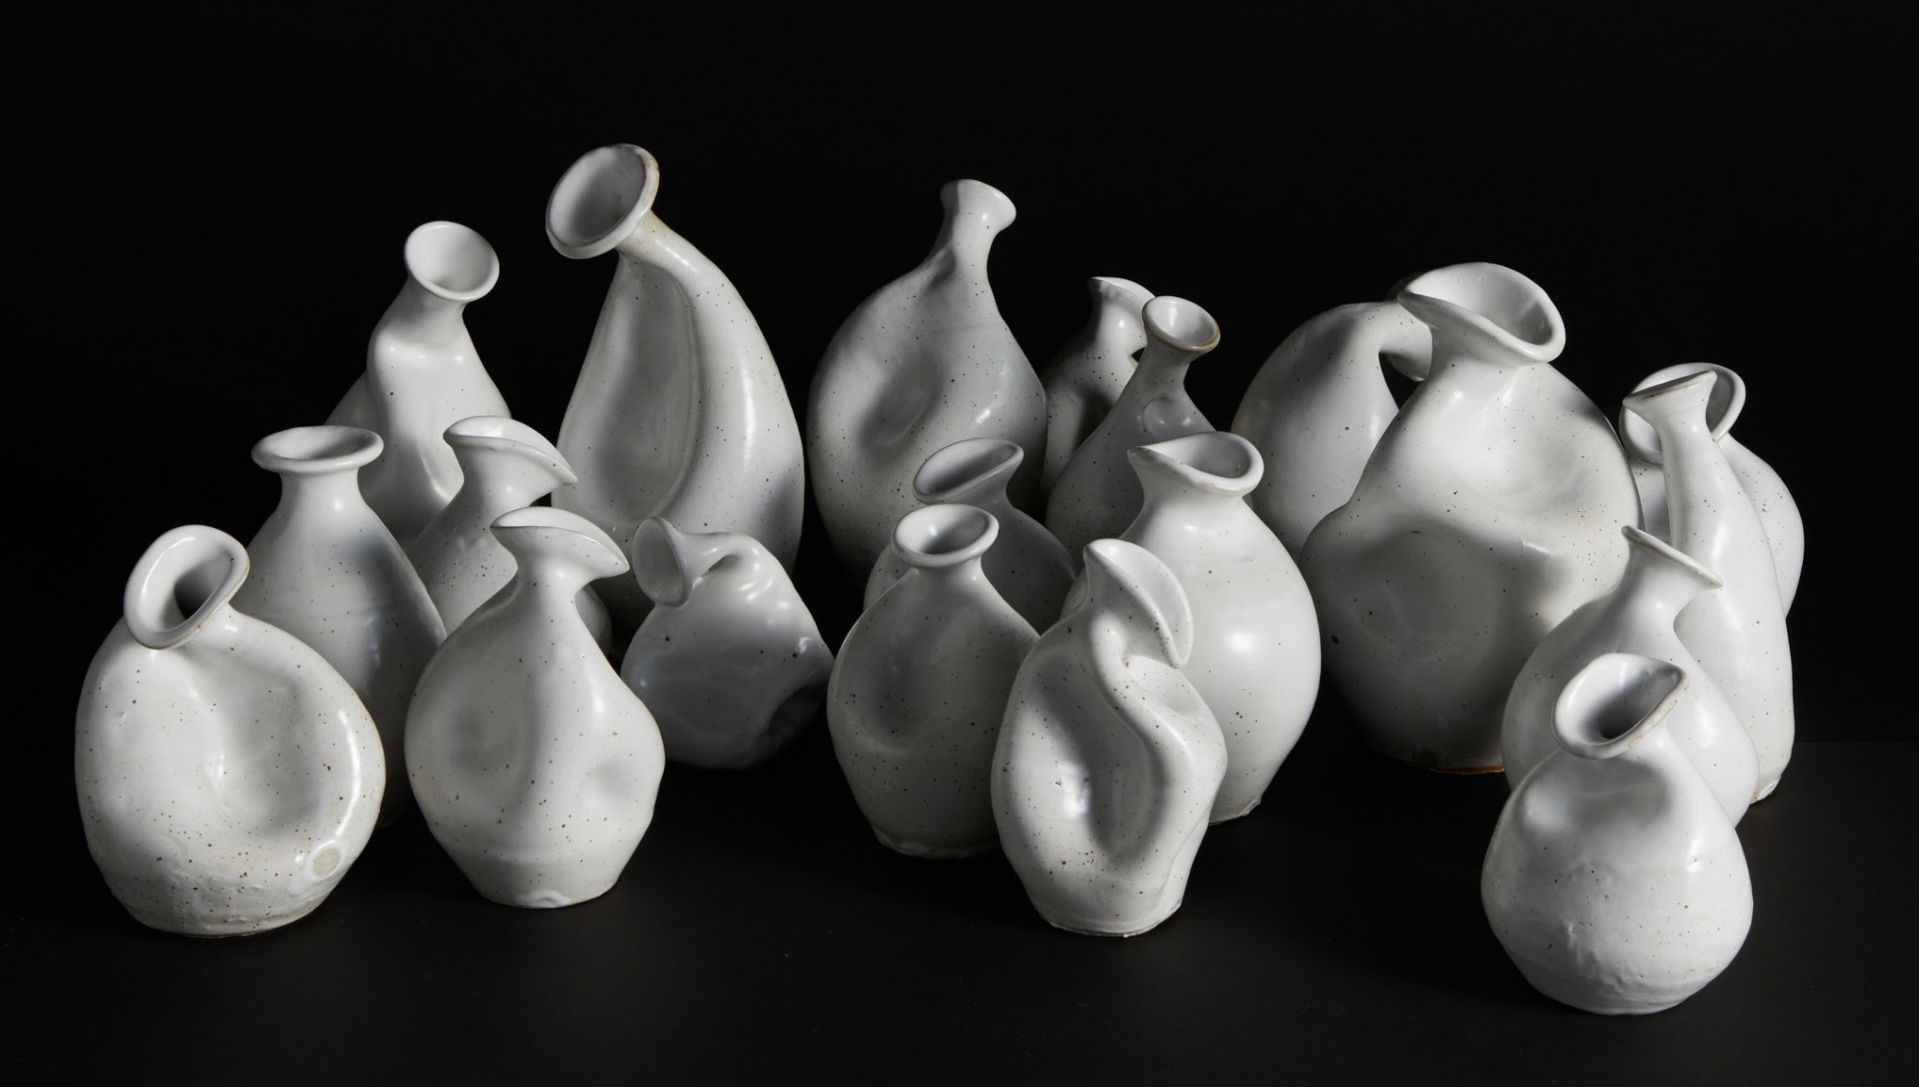 Celia Feal-Staub, Untitled, 2019, Reduction fired stoneware, various sizes